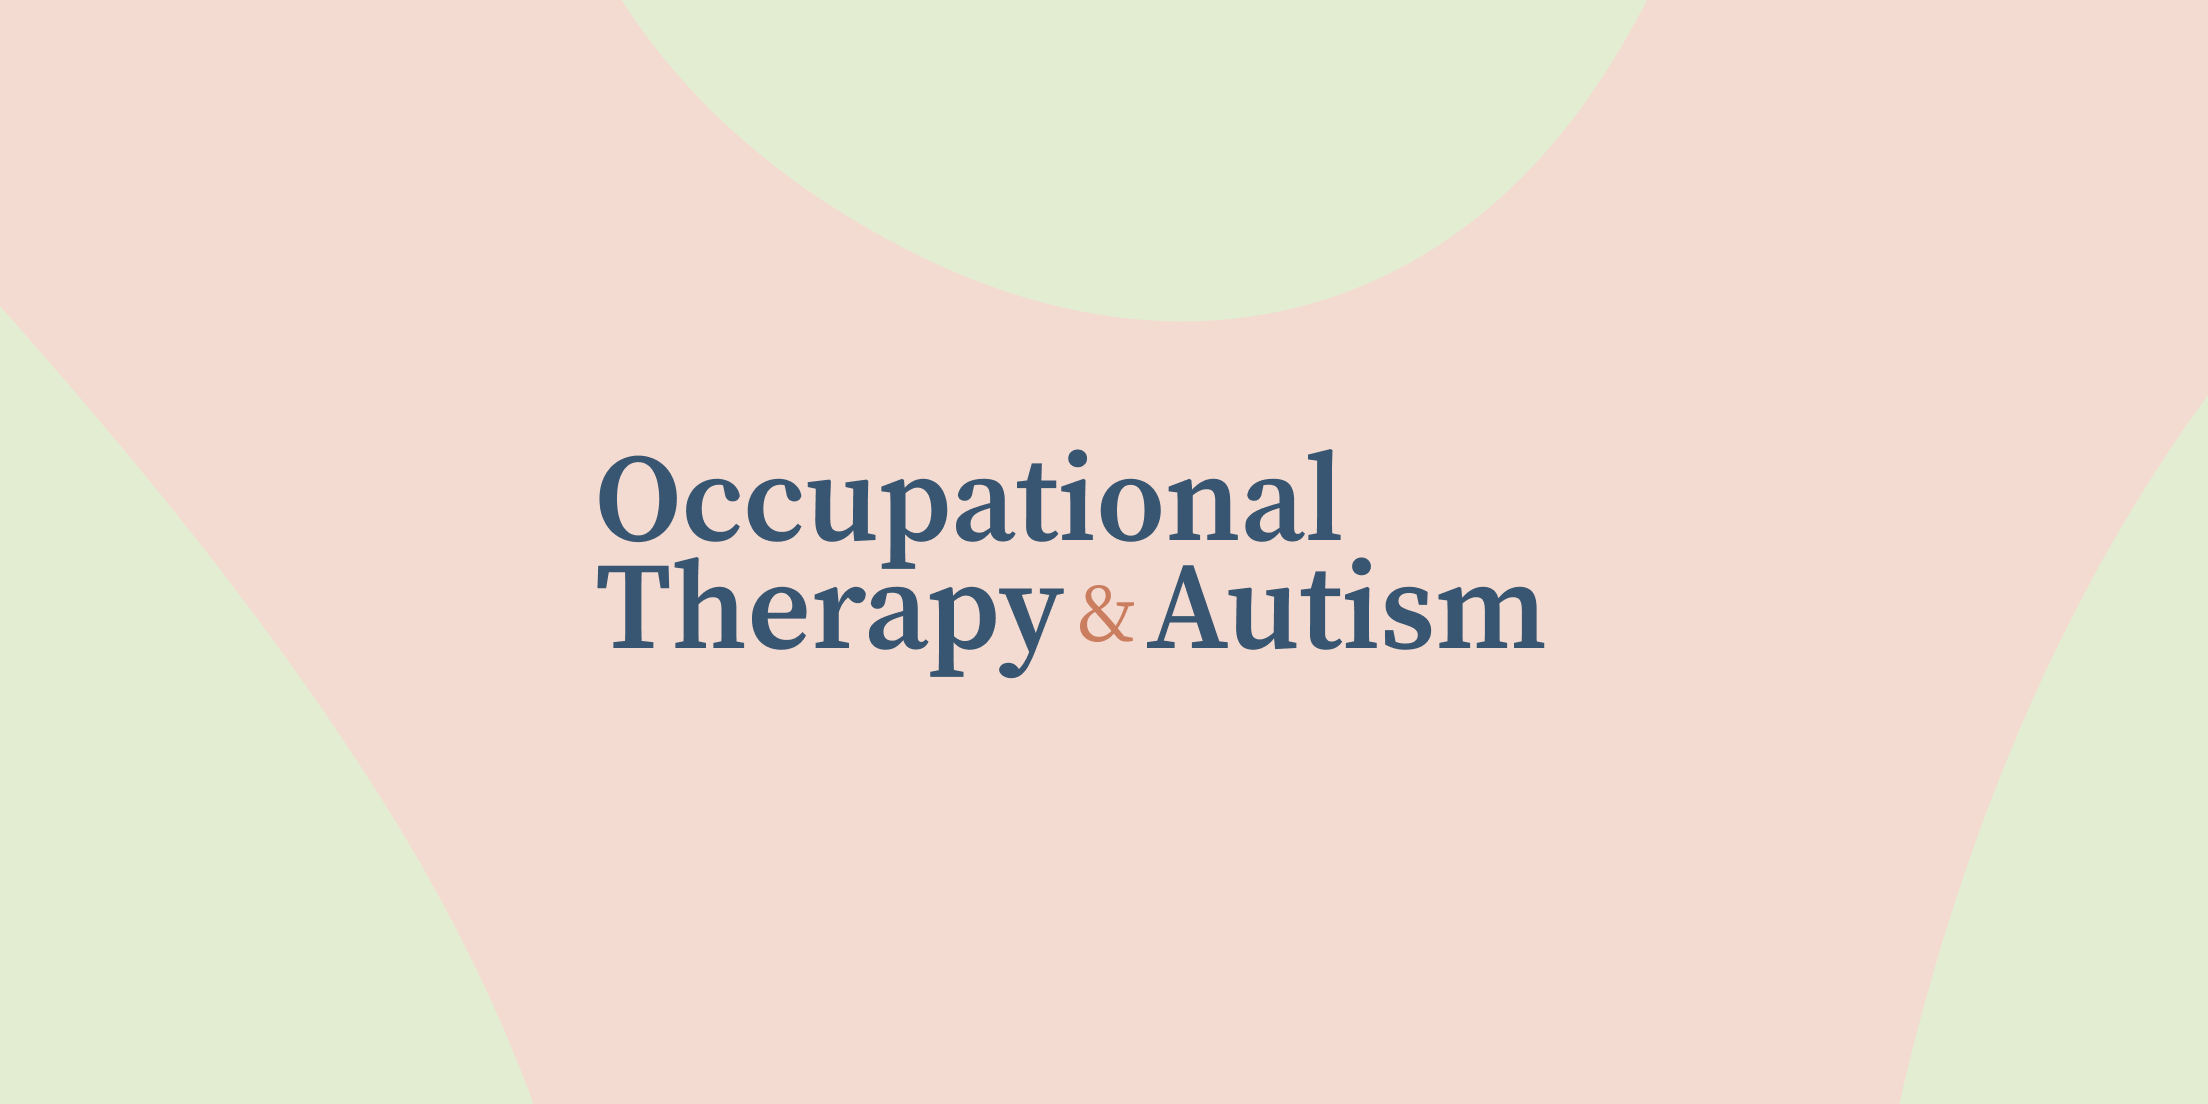 Occupational Therapy for Autism: How Much Will It Help?